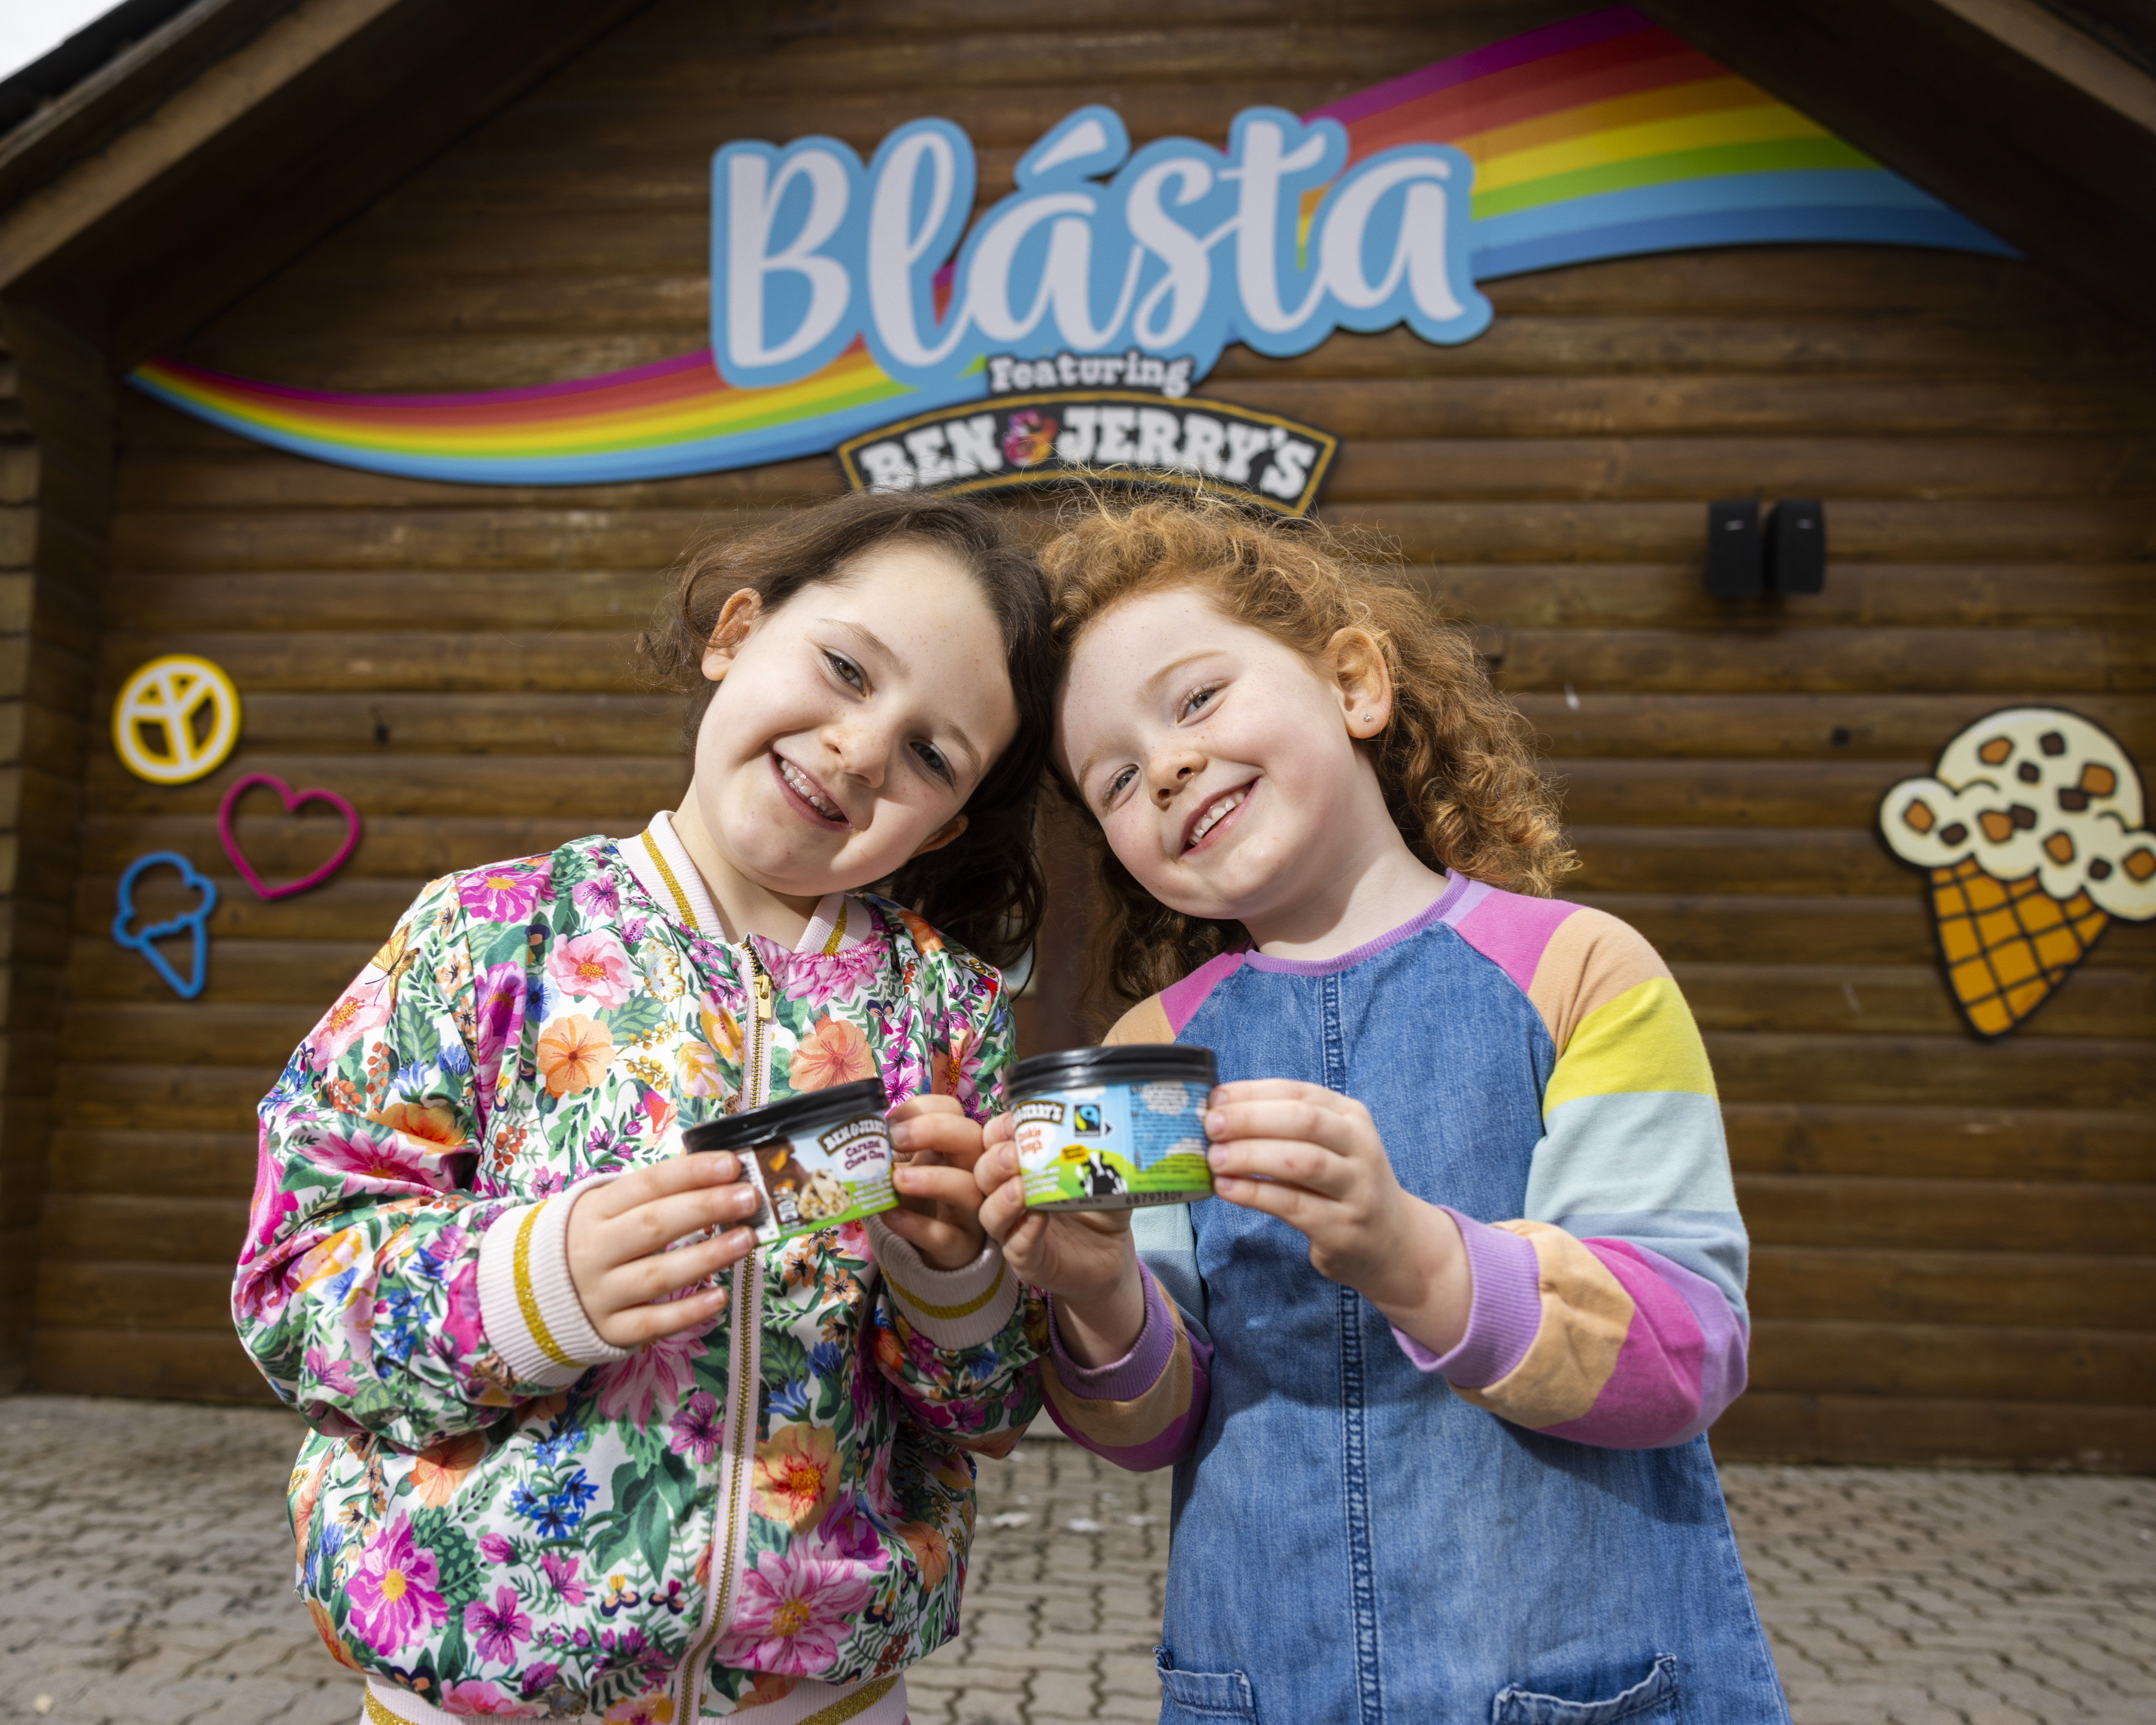 two children outside an ice cream parlour holding tubs of Ben & Jerry's ice cream